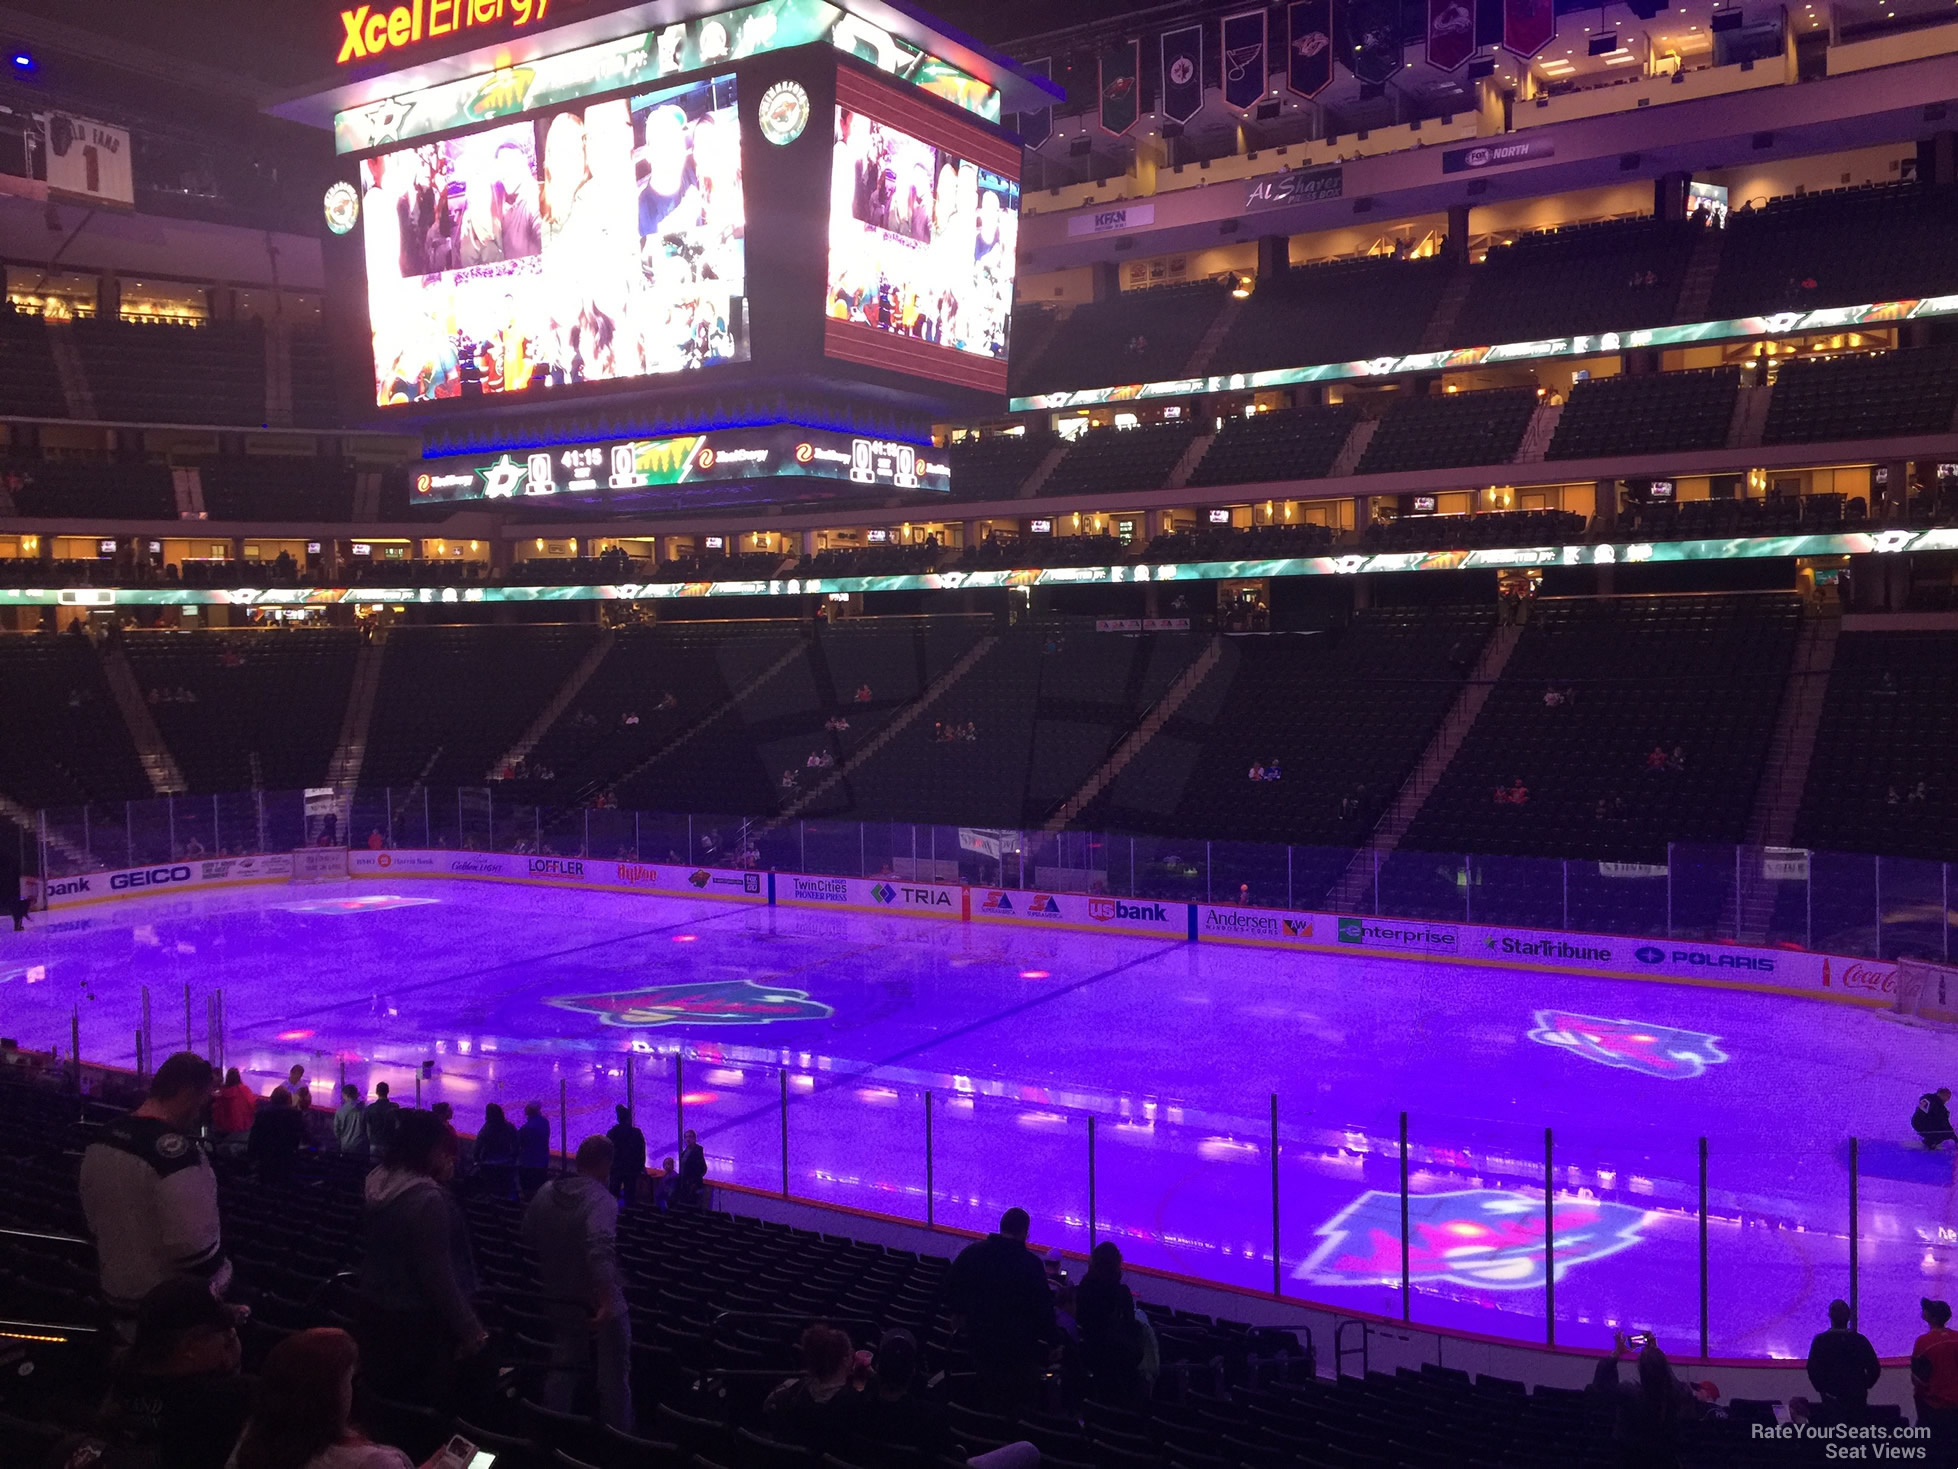 section 114, row 24 seat view  for hockey - xcel energy center